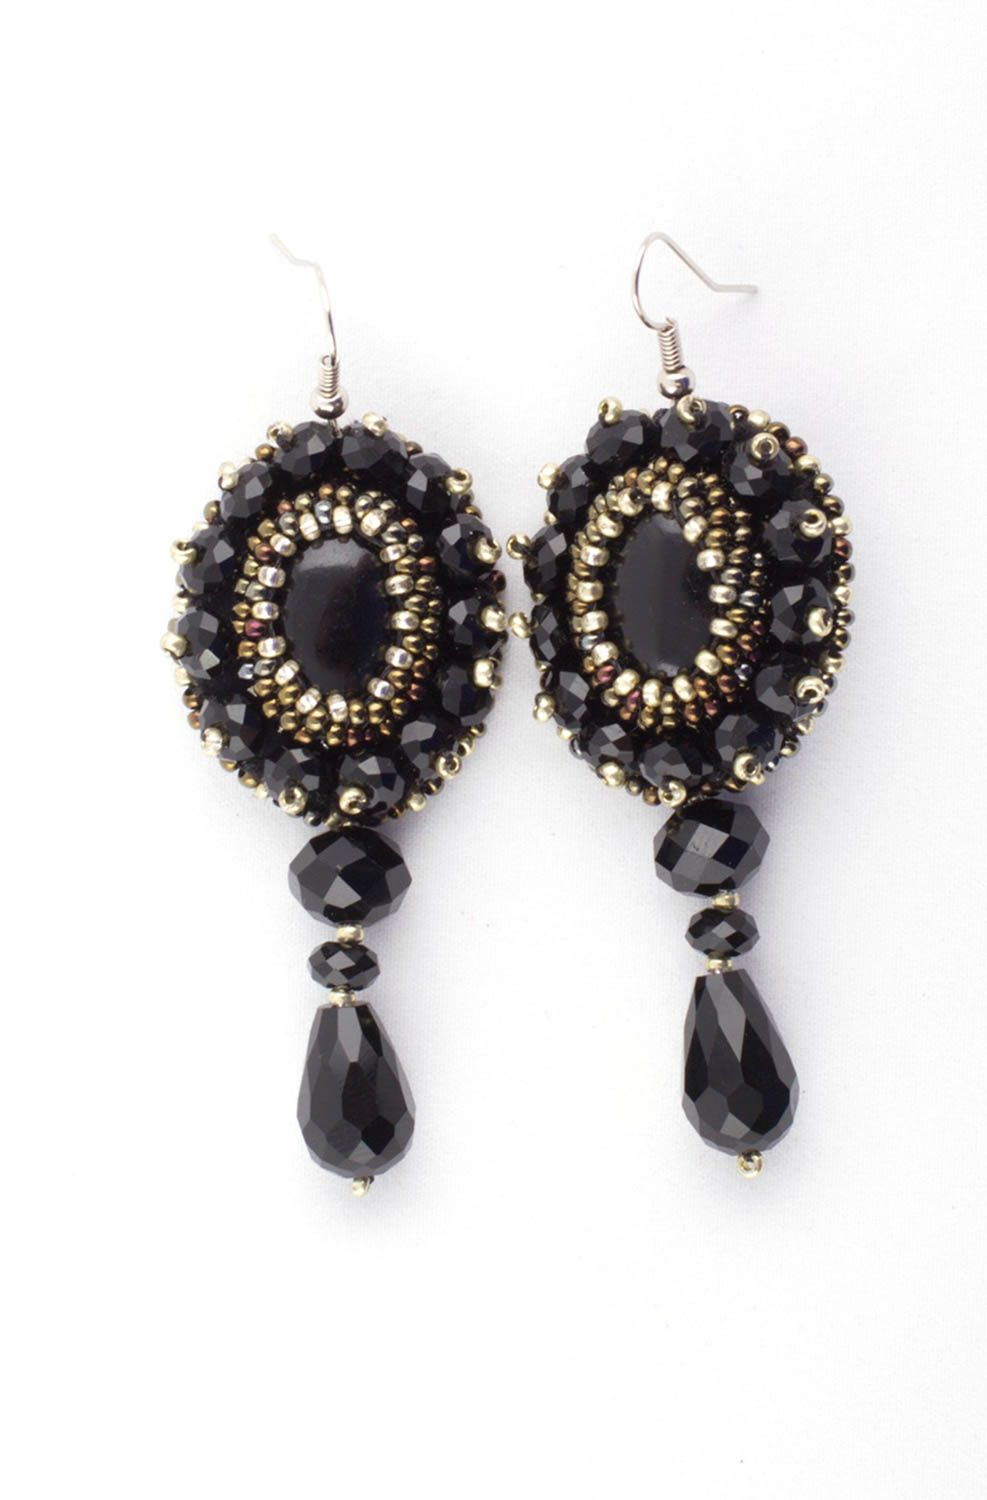 Handmade black earrings earrings with natural stone earrings with charms  photo 3